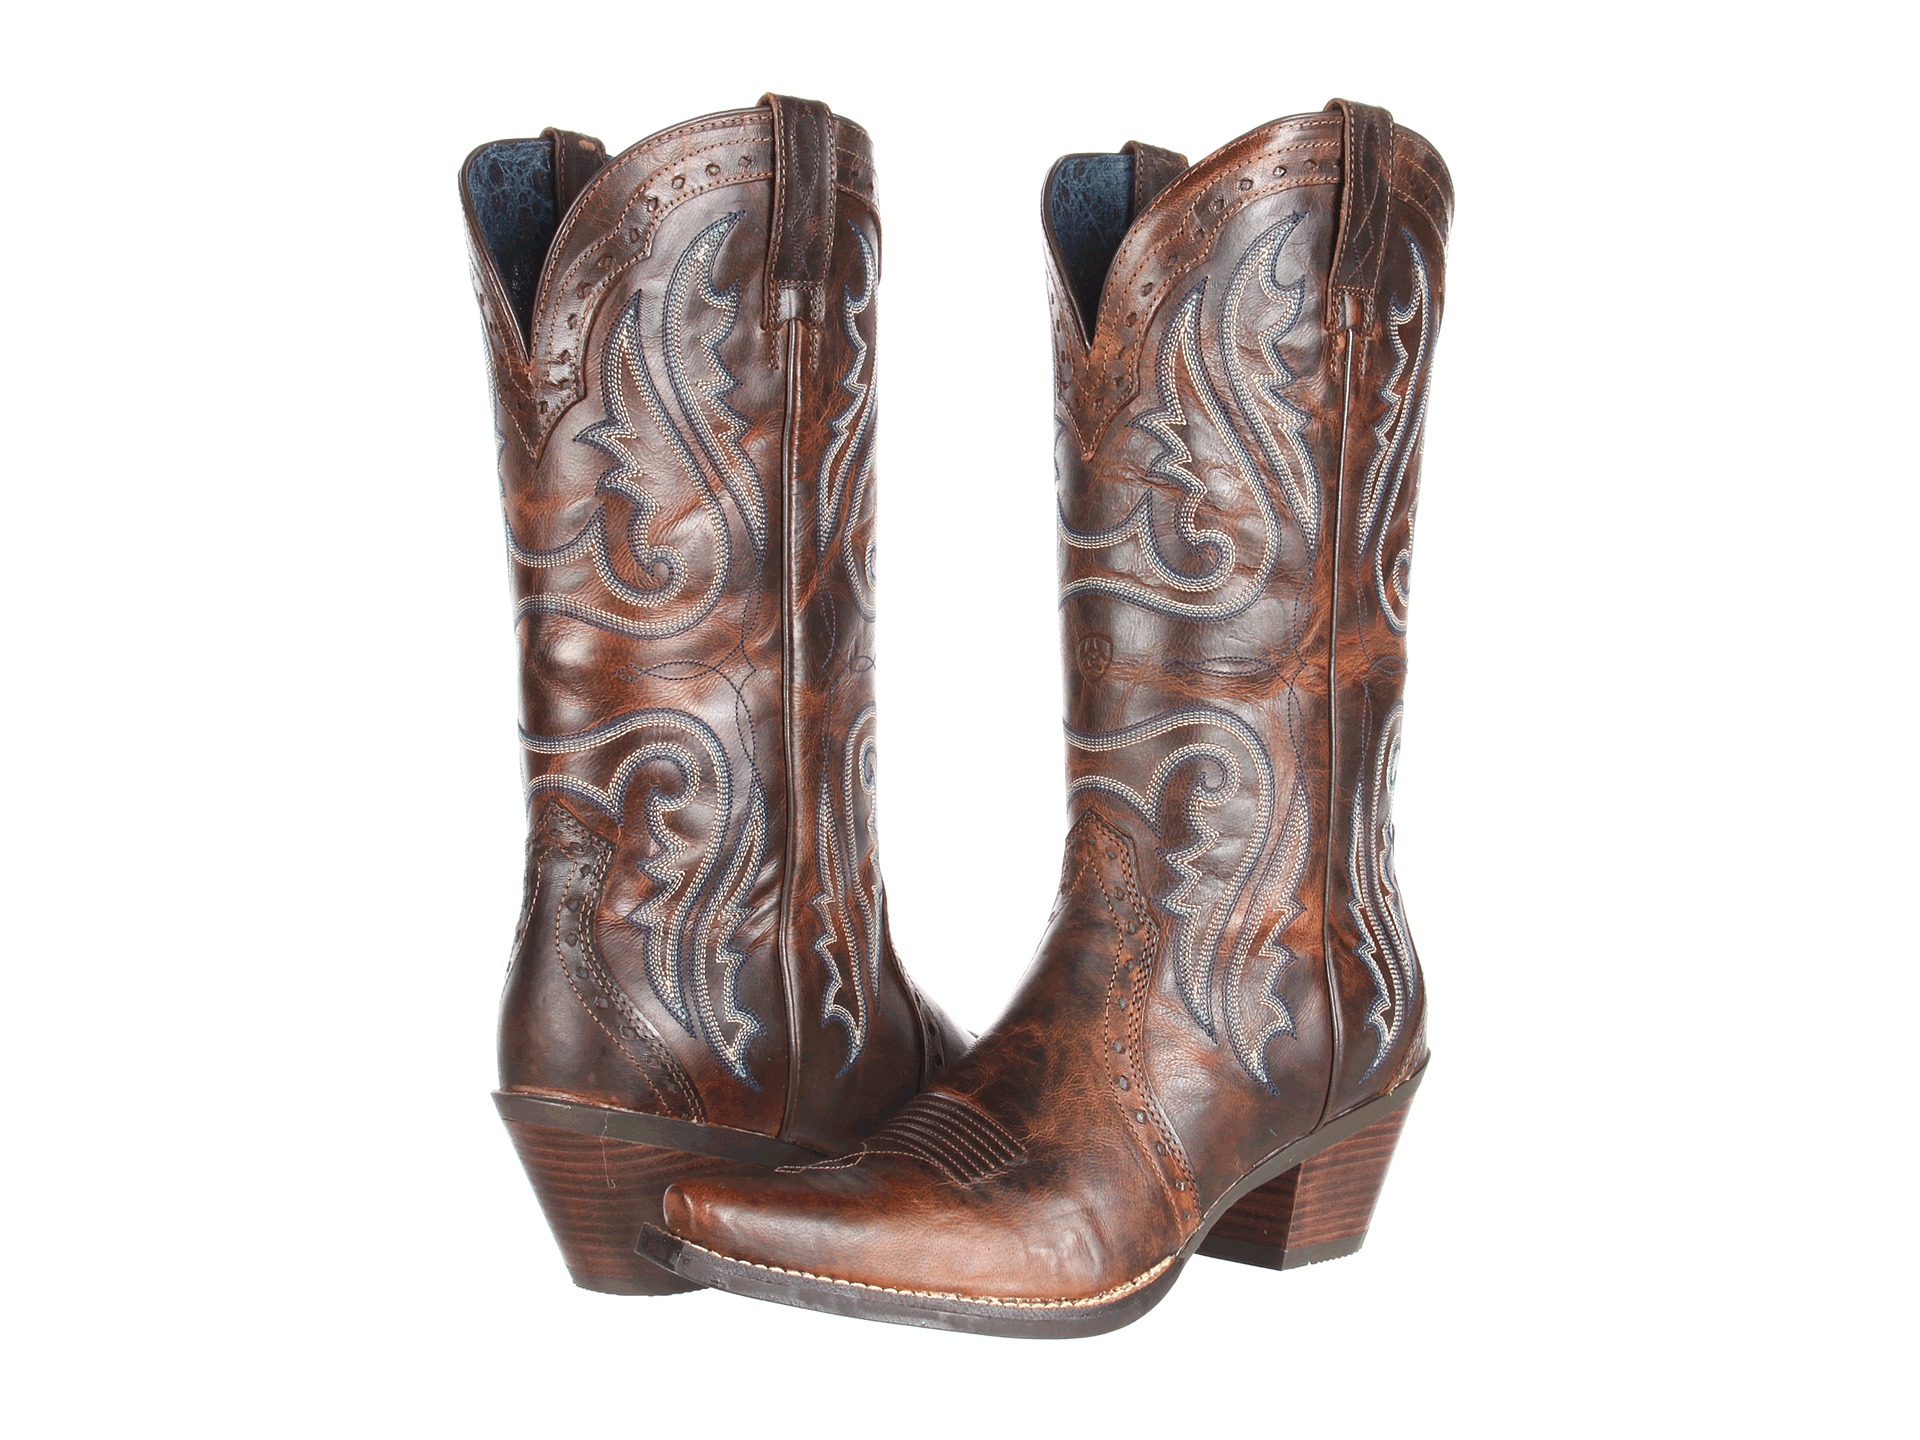 Ariat Heritage Western X-Toe at Zappos.com